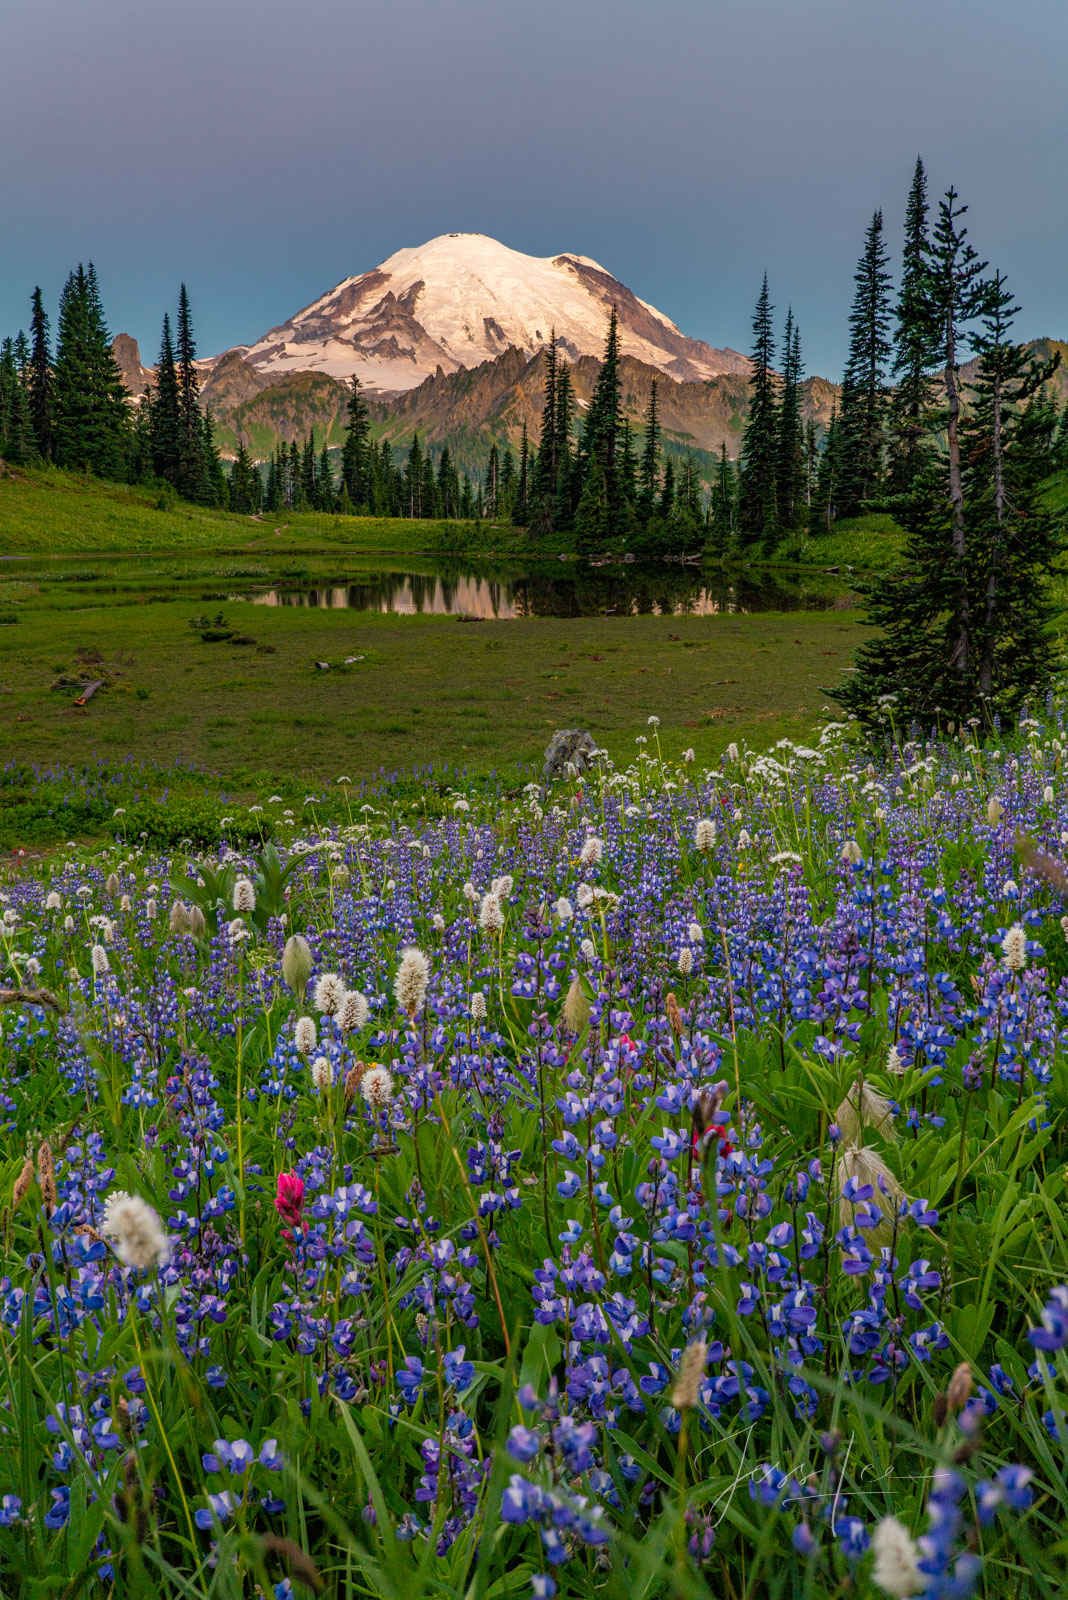 Mt Rainier Sunrise, Tipso Lake reflection and summer Lupine flowers make a beautiful picture of the splendor of Mt. Rainier National...